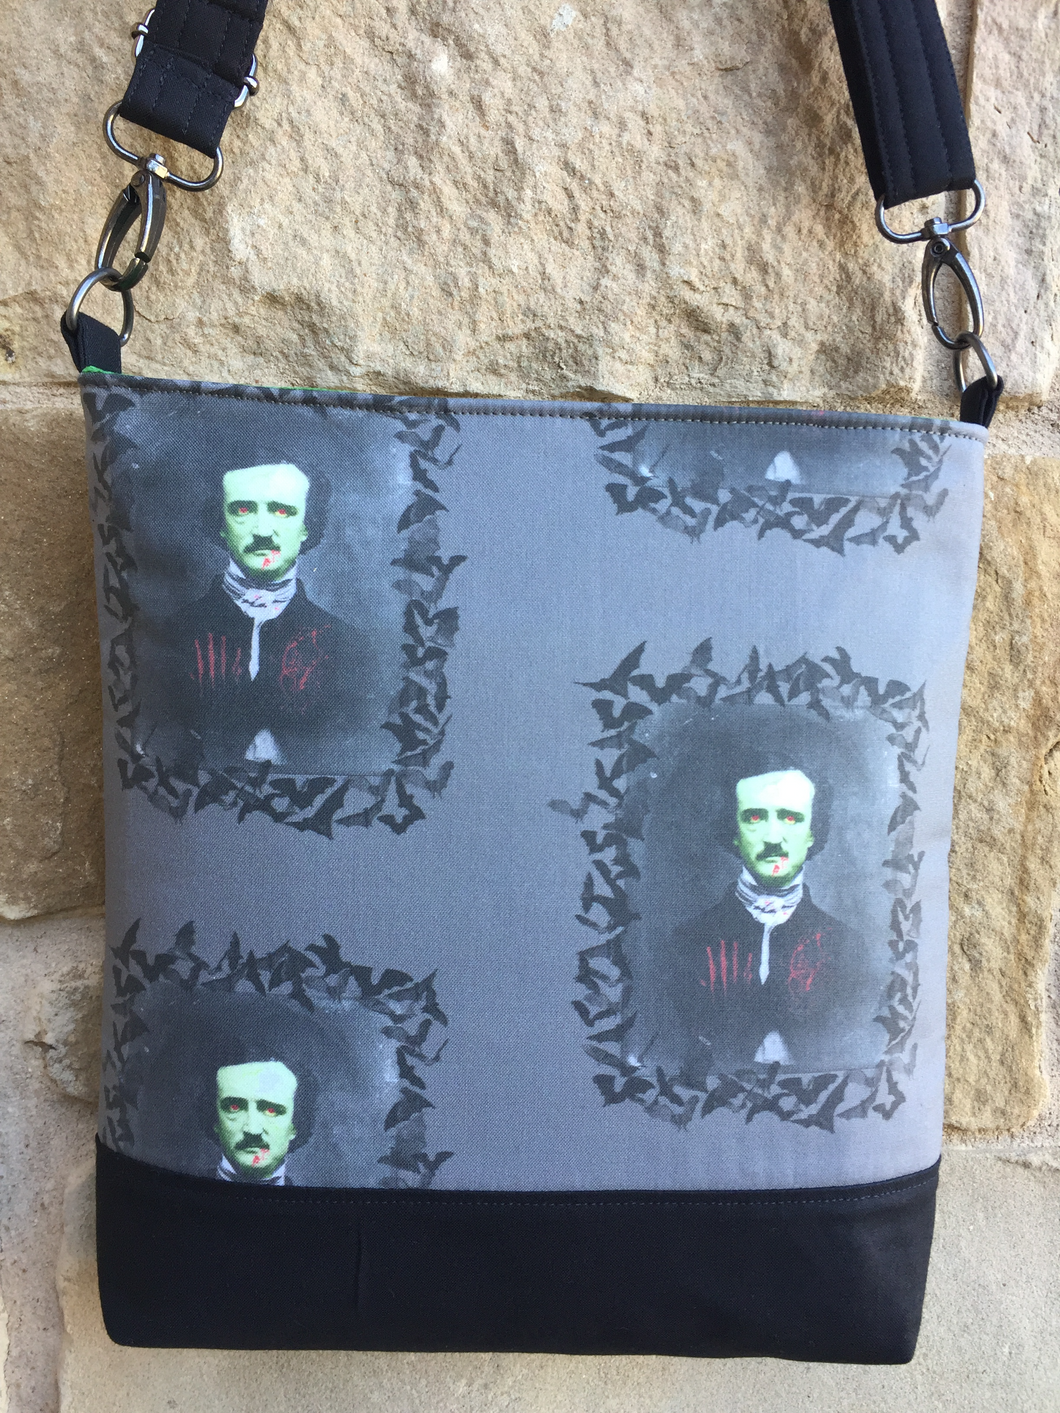 Messenger Bag Made With Zombie Poe Inspired Fabric -  Adjustable Strap - Zippered Closure - Zippered Pocket - Cross Body Bag